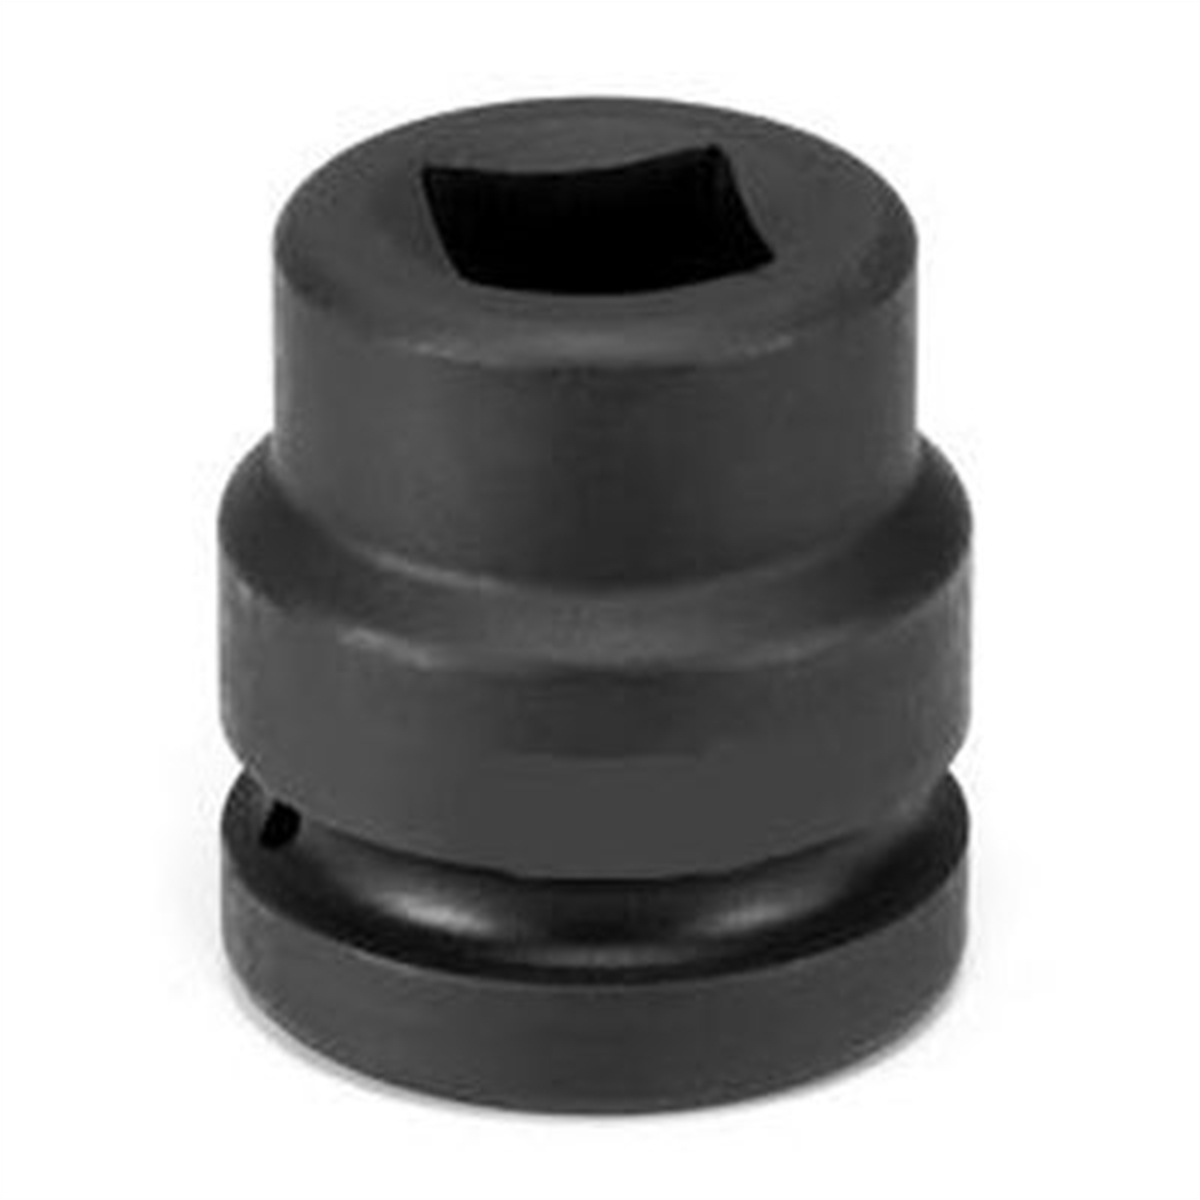 20mm 4-Point (Square) Standard Length 1" Drive Impact Socket